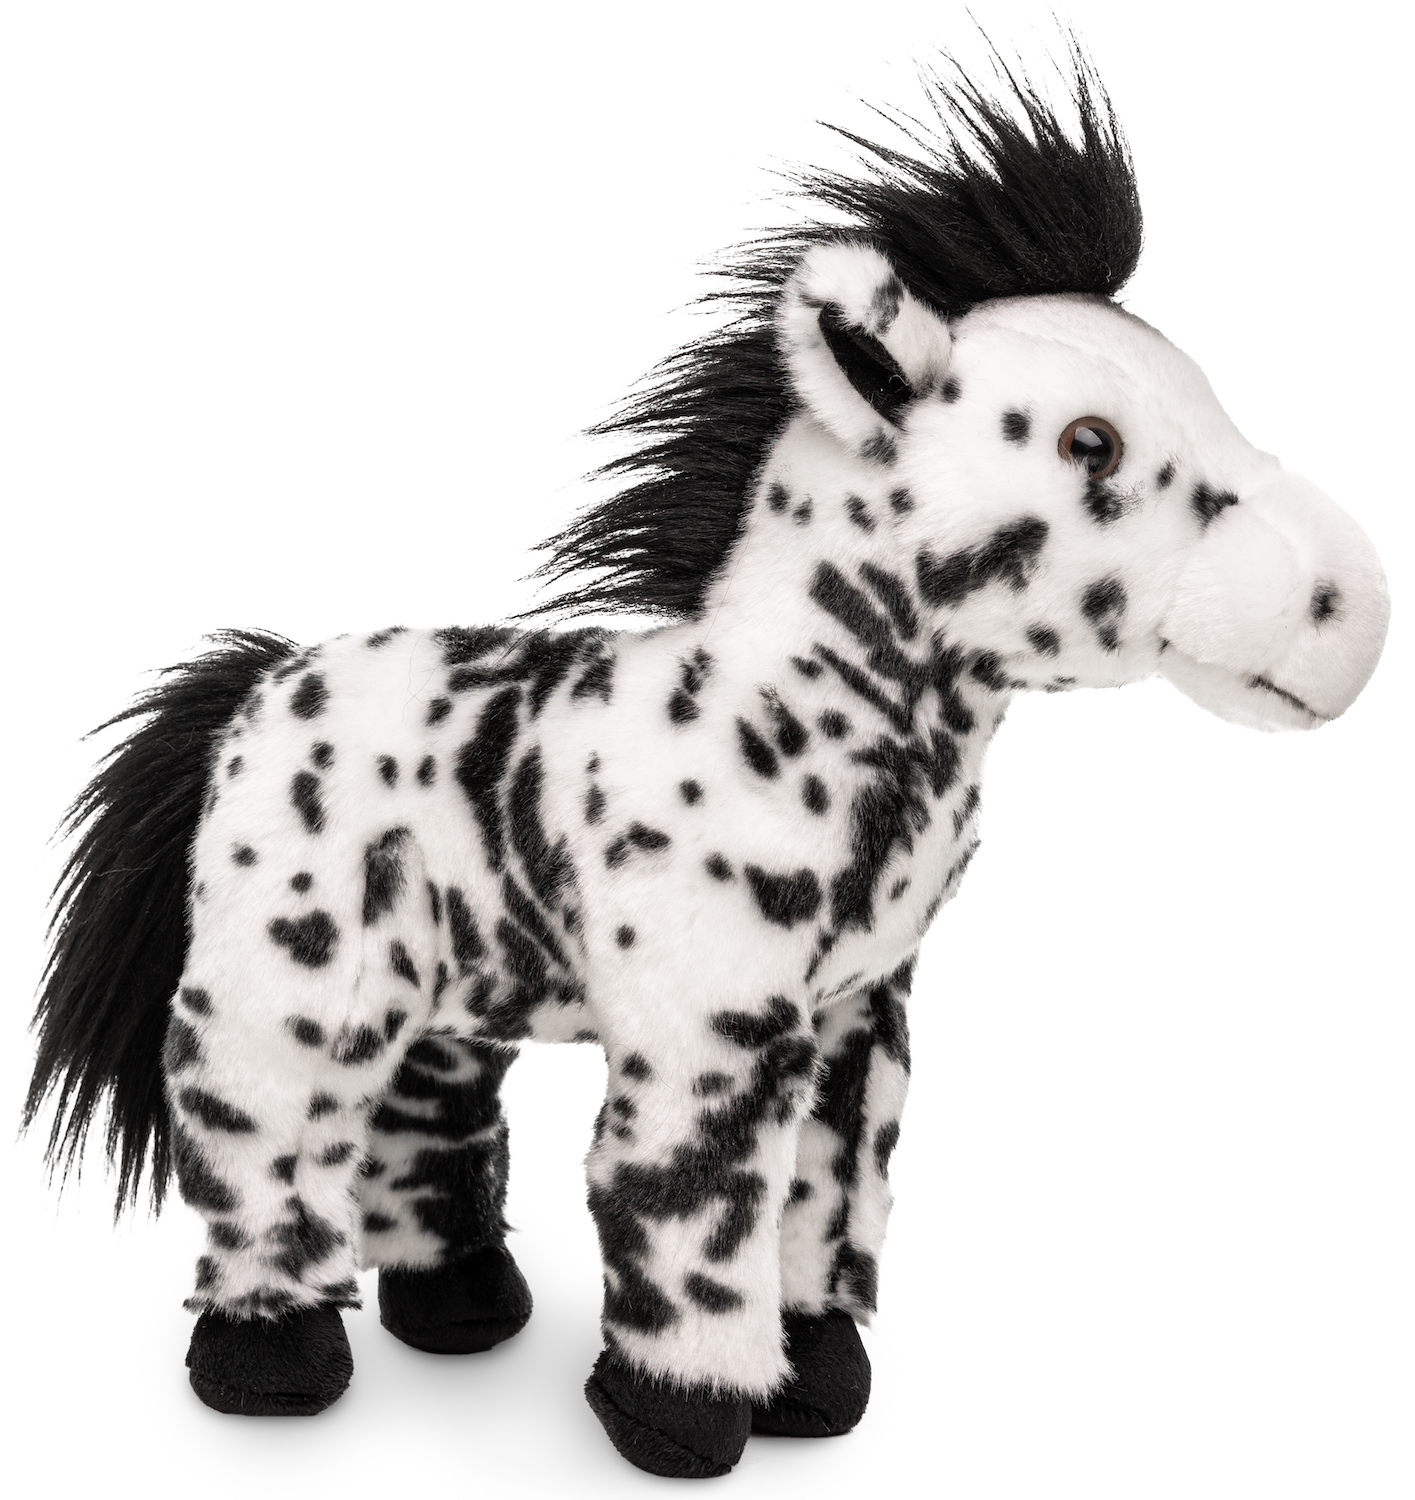 Horse white with black spots, standing - 28 cm (height) 